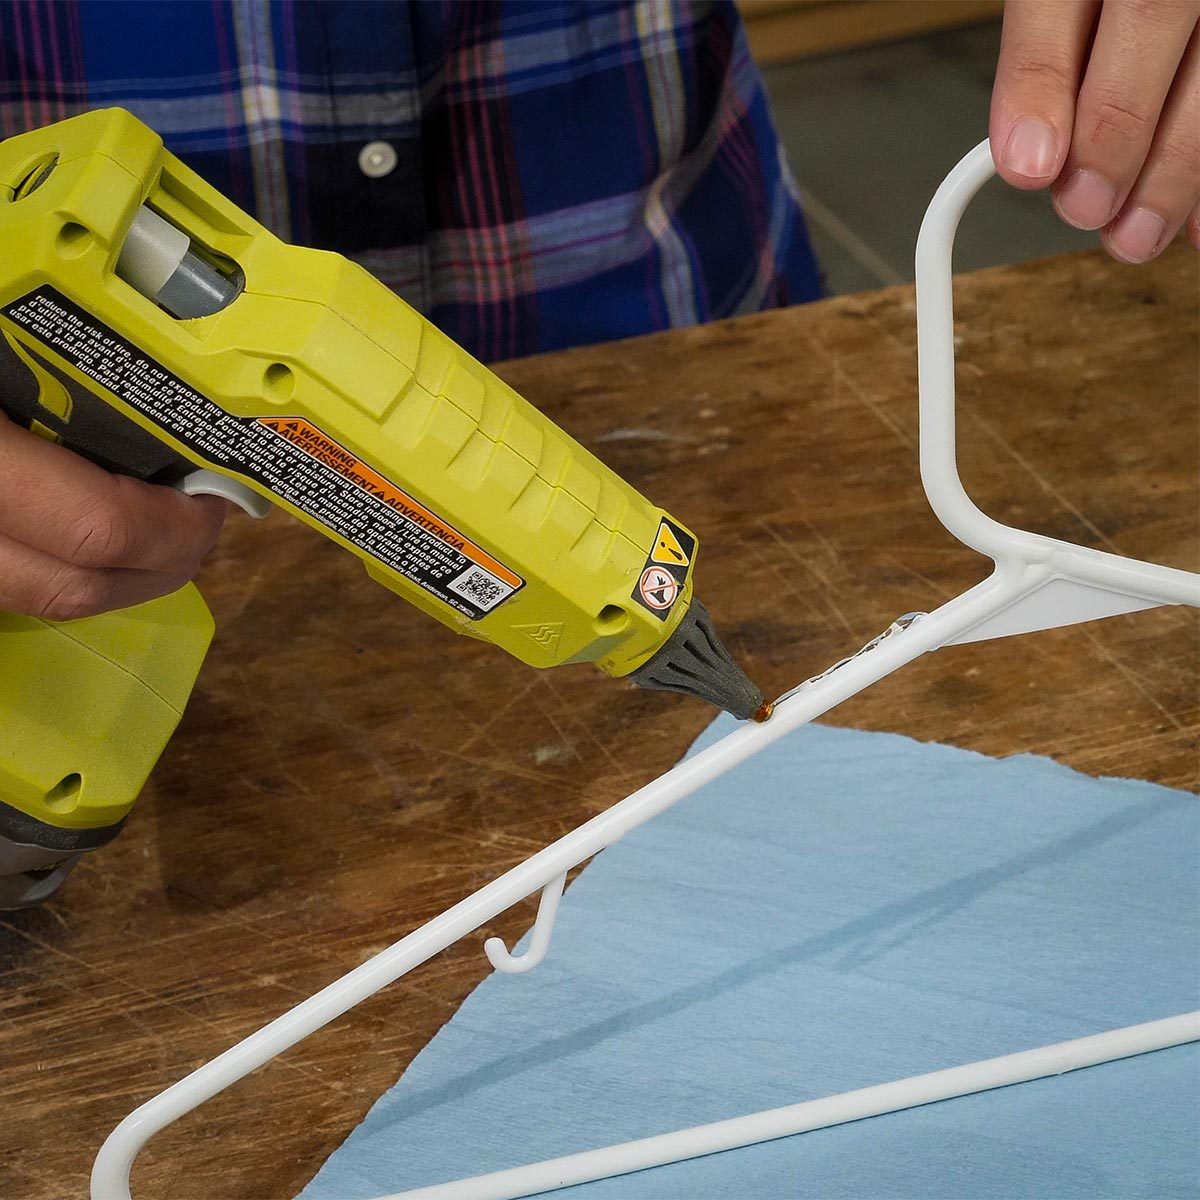 7 Cool Tips for Working with Hot Glue